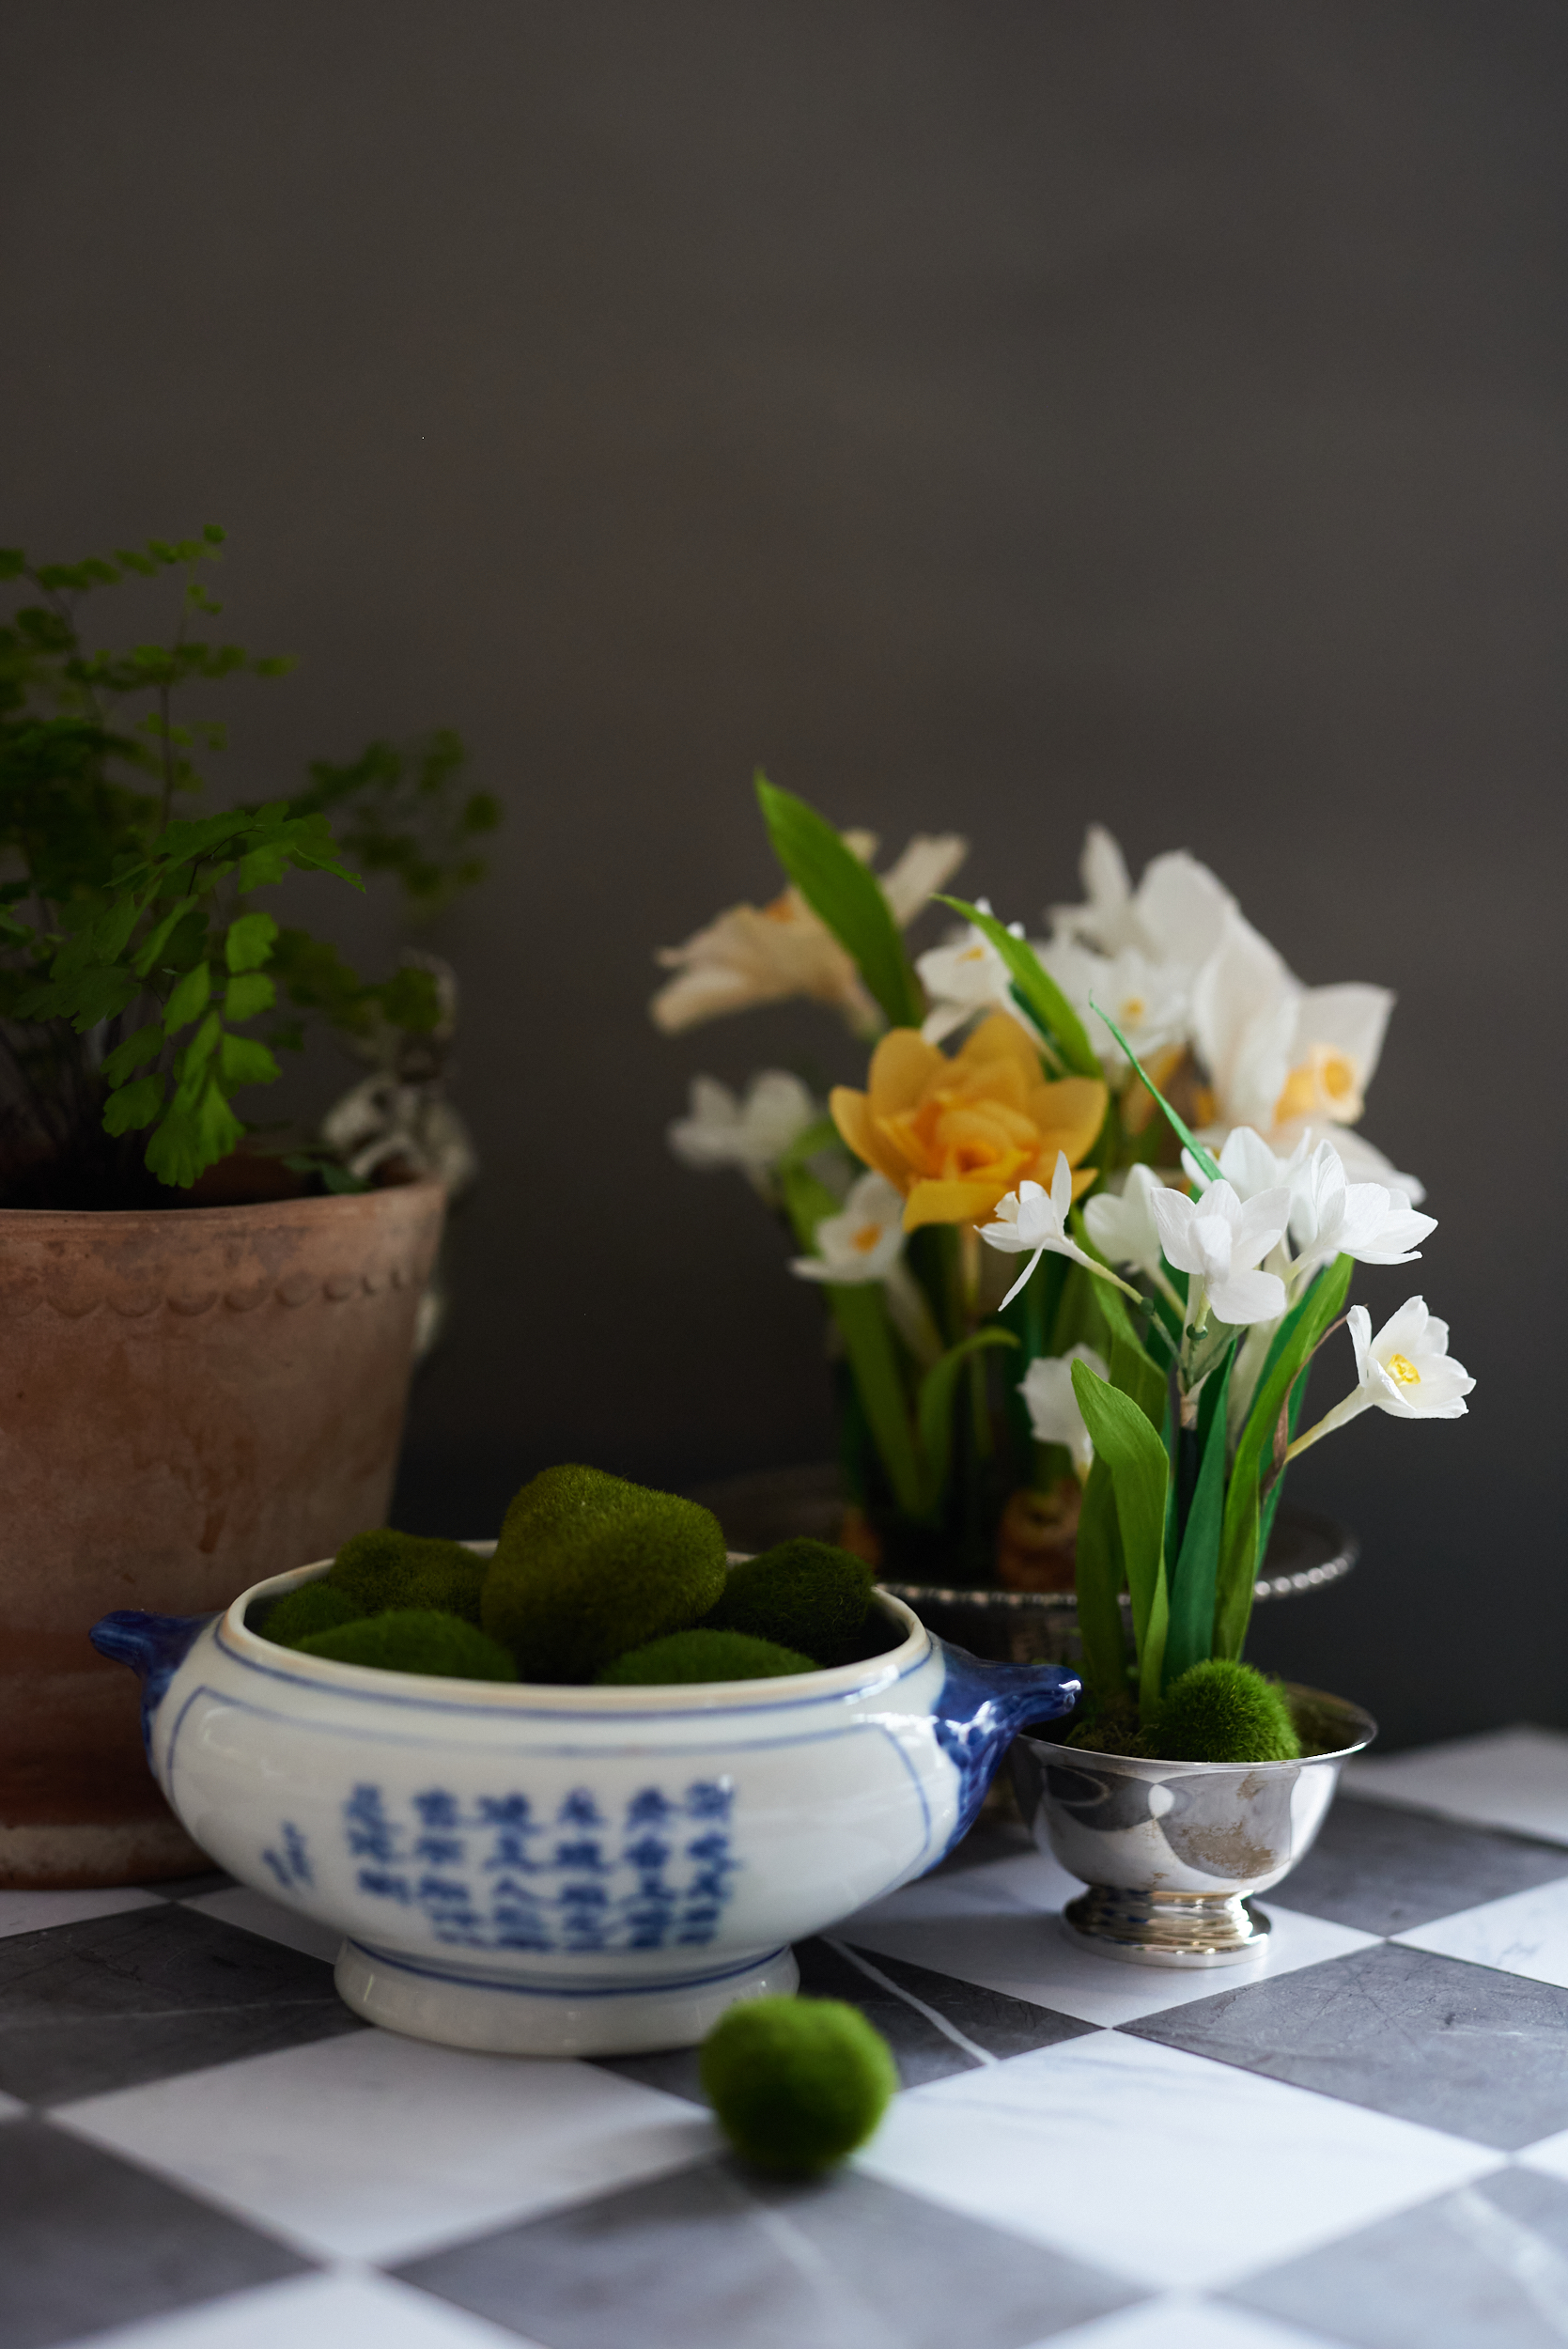 A still life arrangement of crepe paper daffodils and paper whites on a checkerboard floor